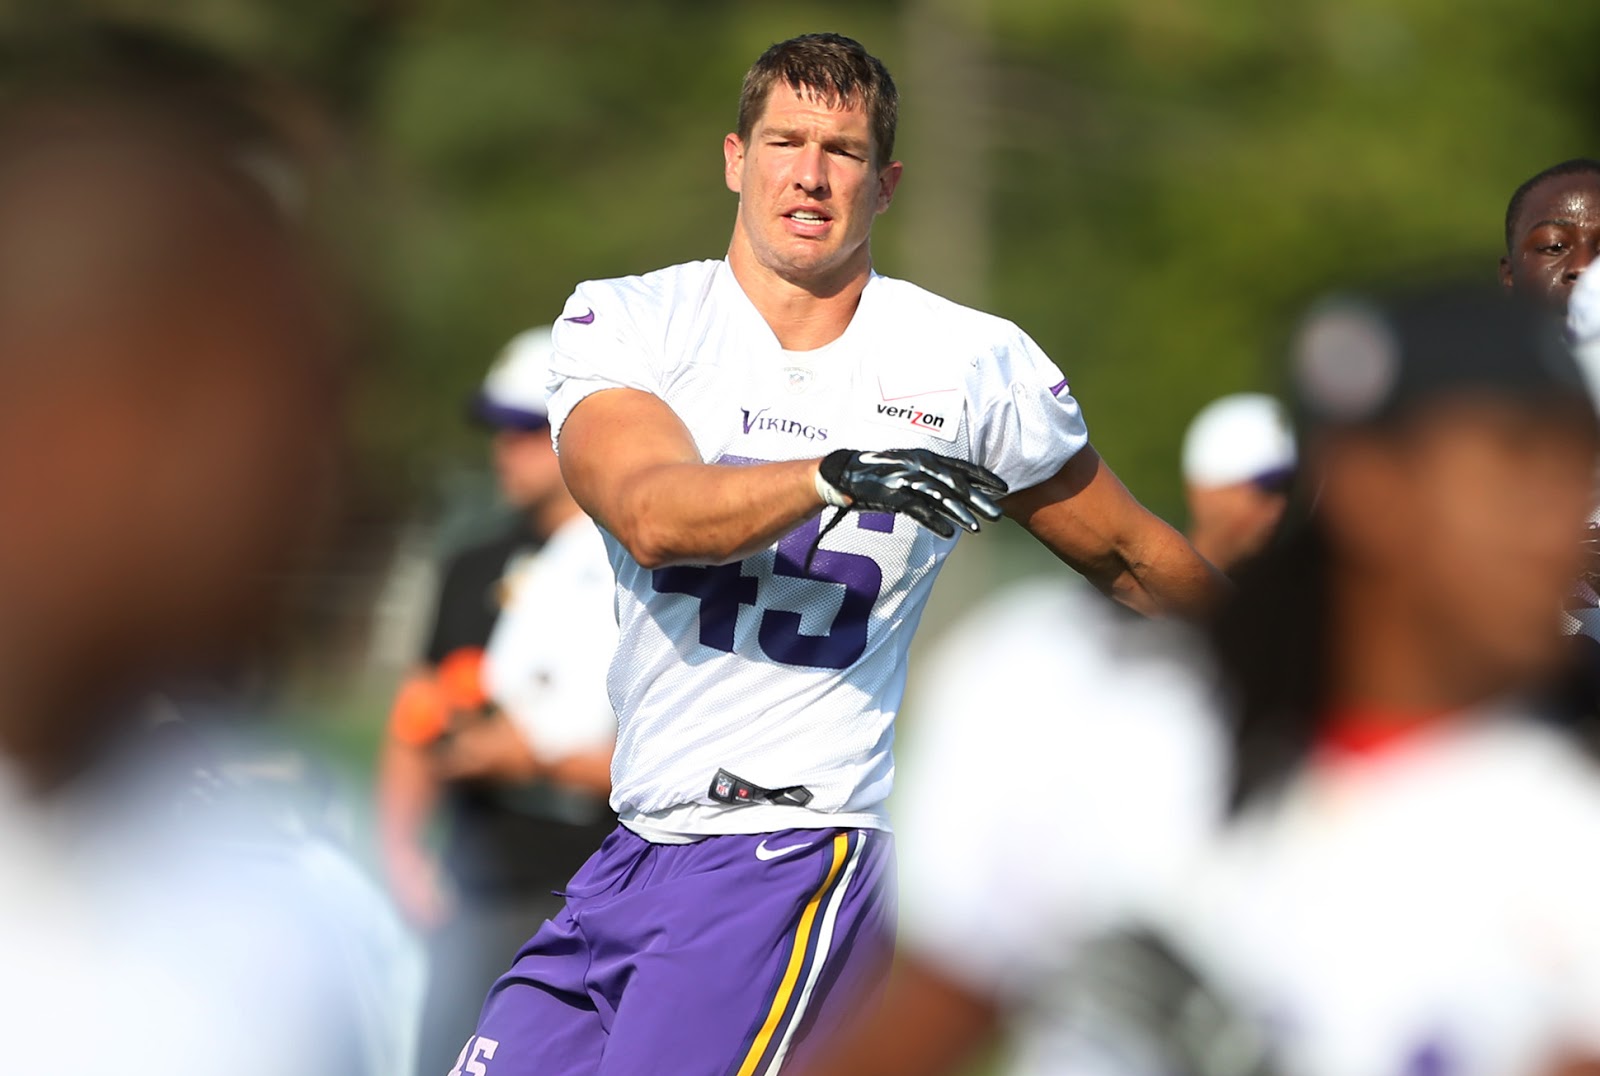 The Blair Necessities: Brian Peters Hoping to Stick With Vikings